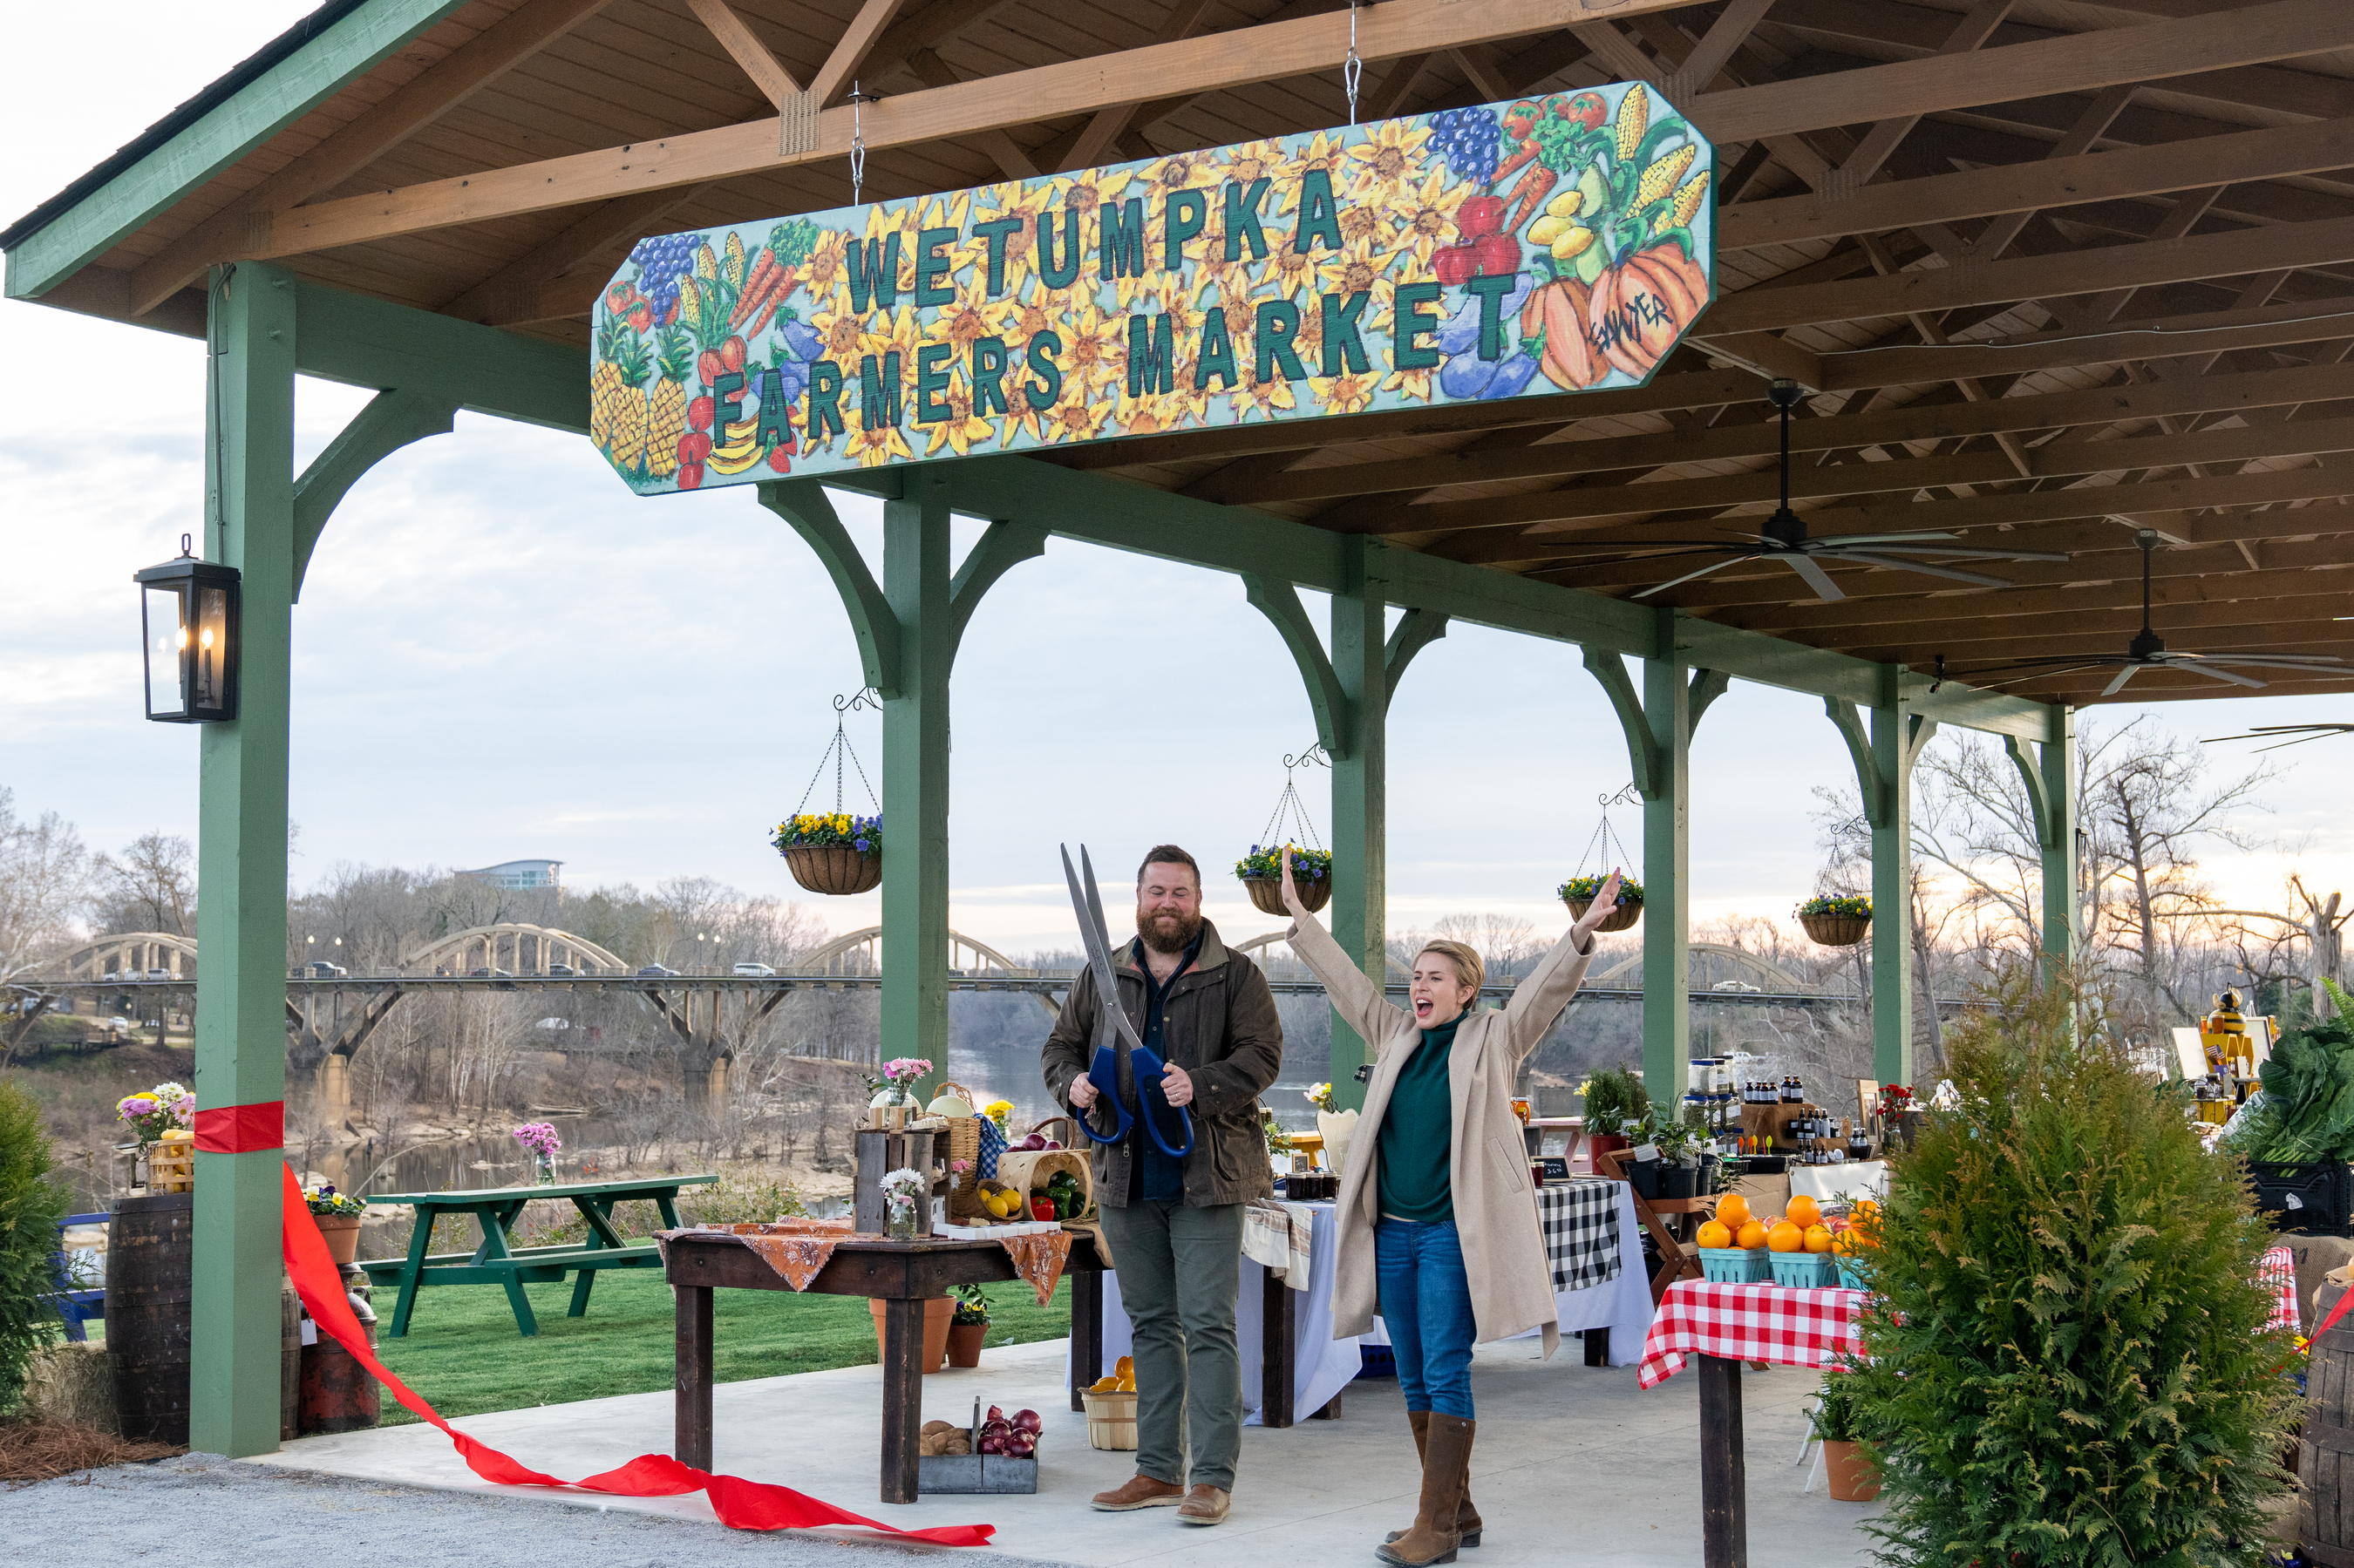 As seen on Home Town Takeover, Ben and Erin Napier at the Wetumpka Farmers Market grand opening and celebration.